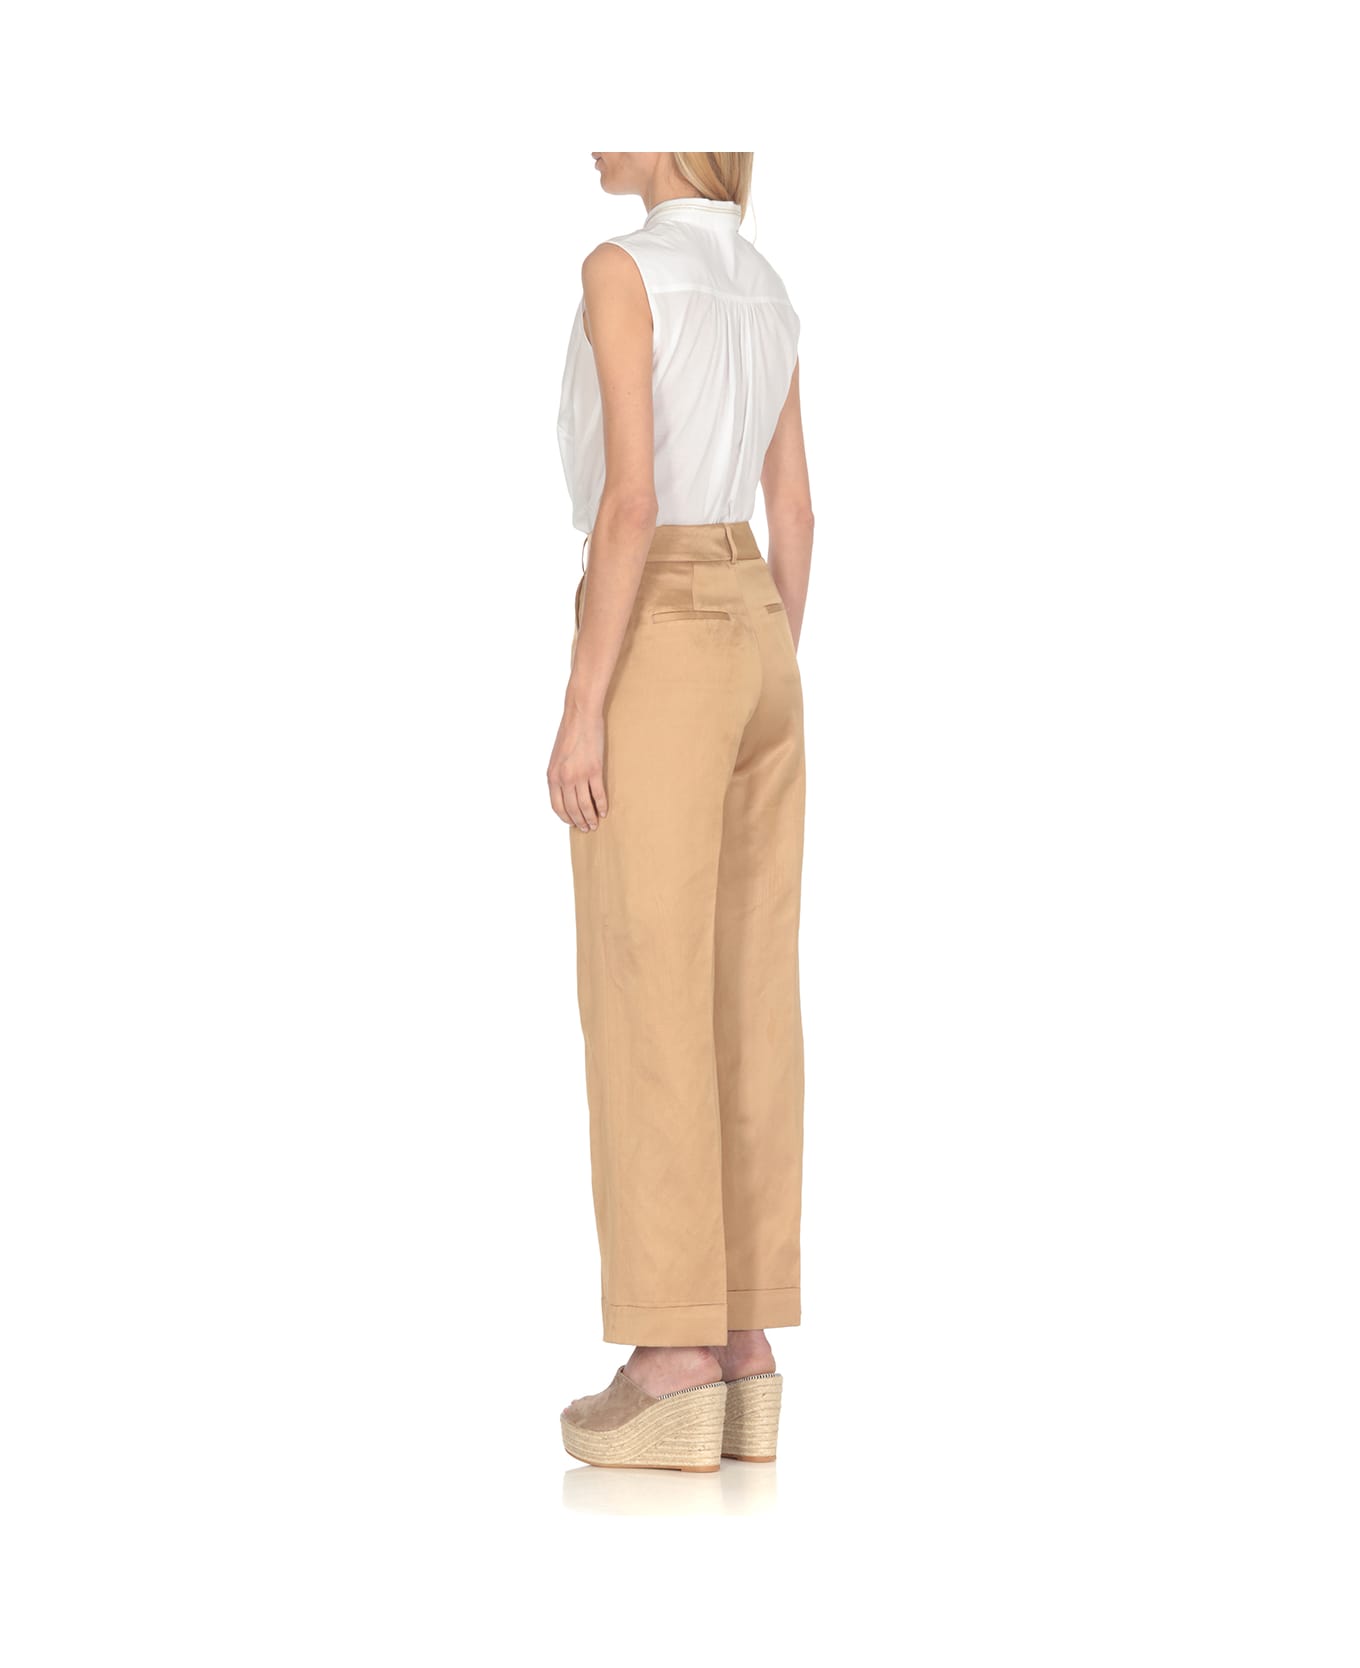 Peserico Linen And Cotton Blend Trousers - Beige